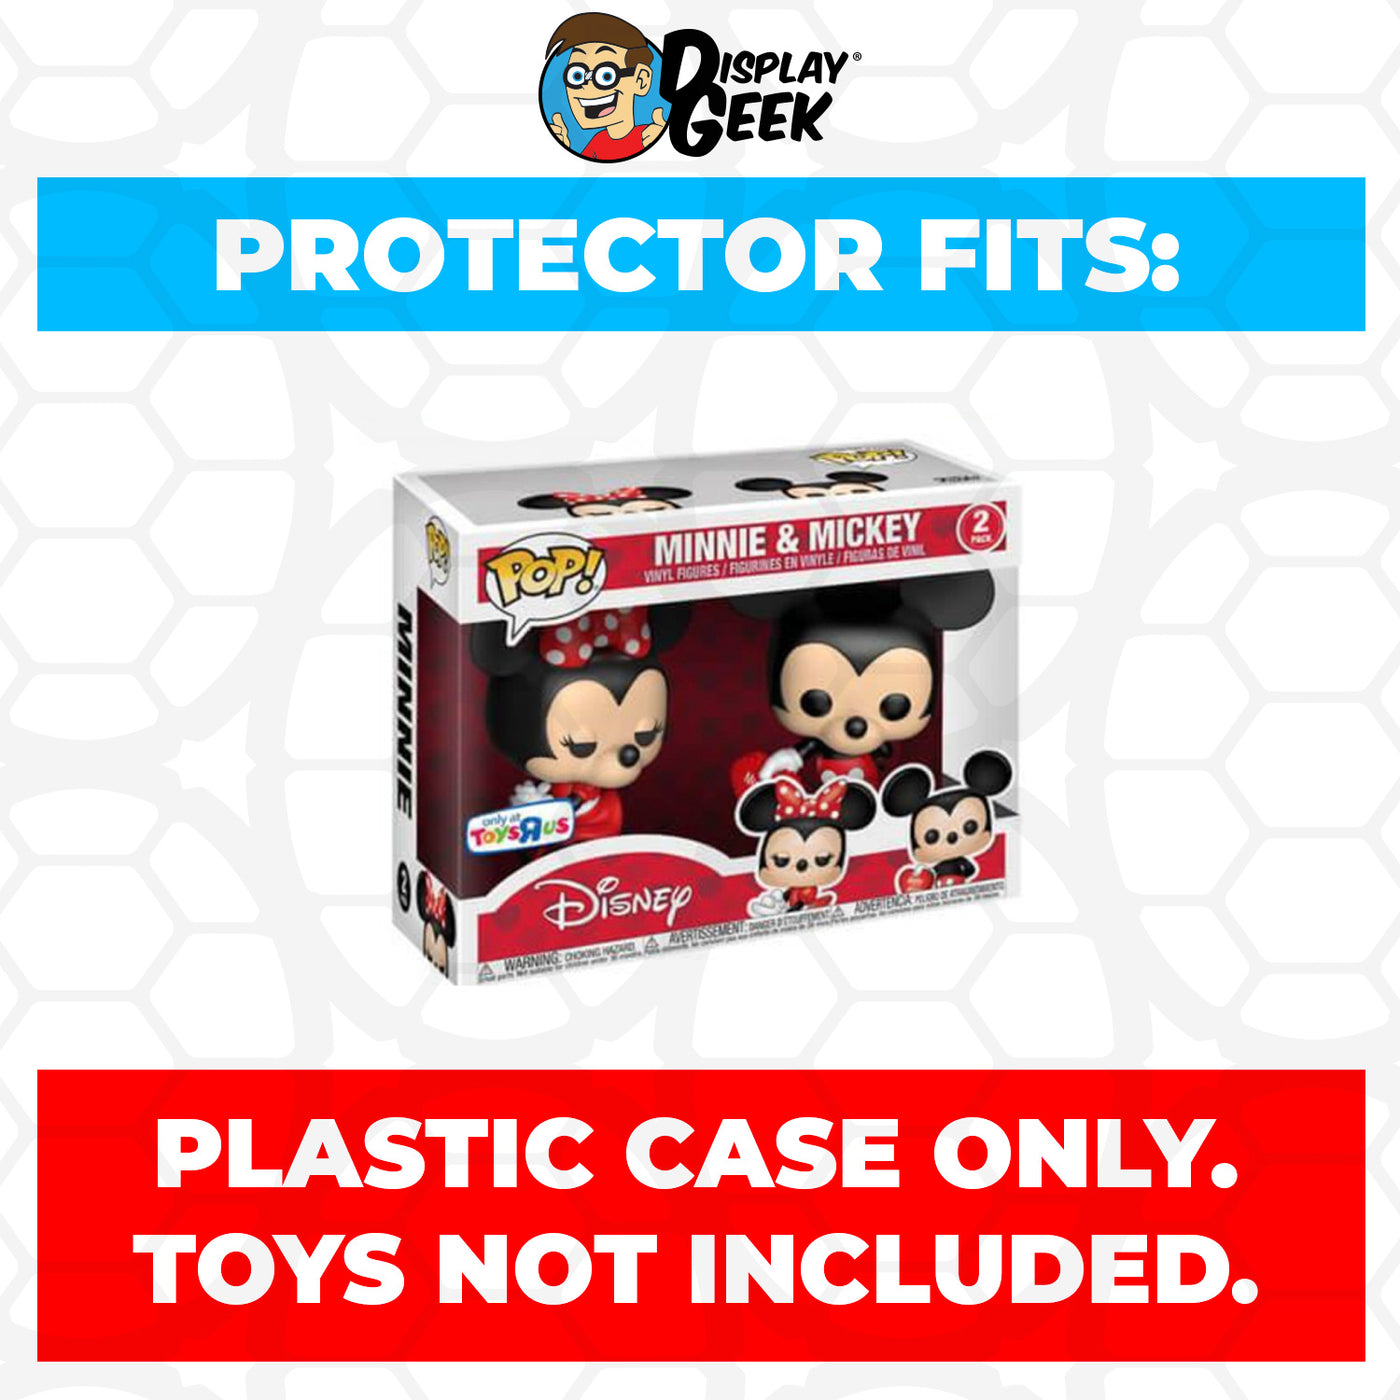 Pop Protector for 2 Pack Minnie & Mickey Valentine Funko Pop on The Protector Guide App by Display Geek